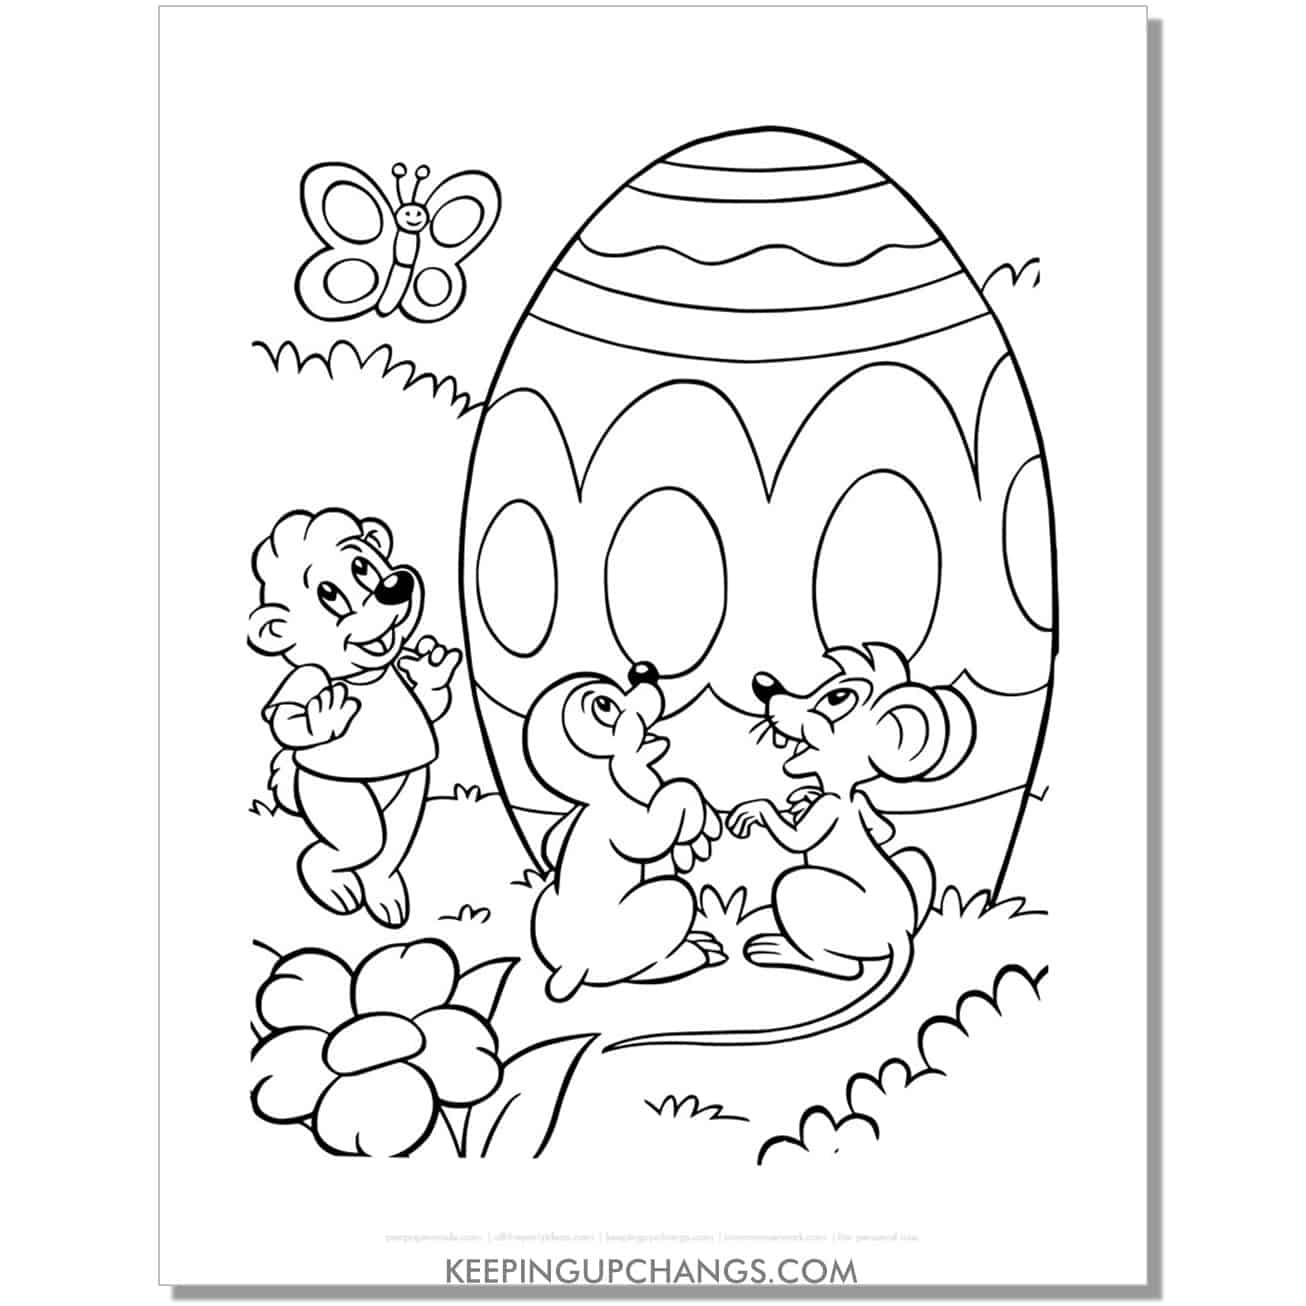 spring animals with easter egg coloring page, sheet.